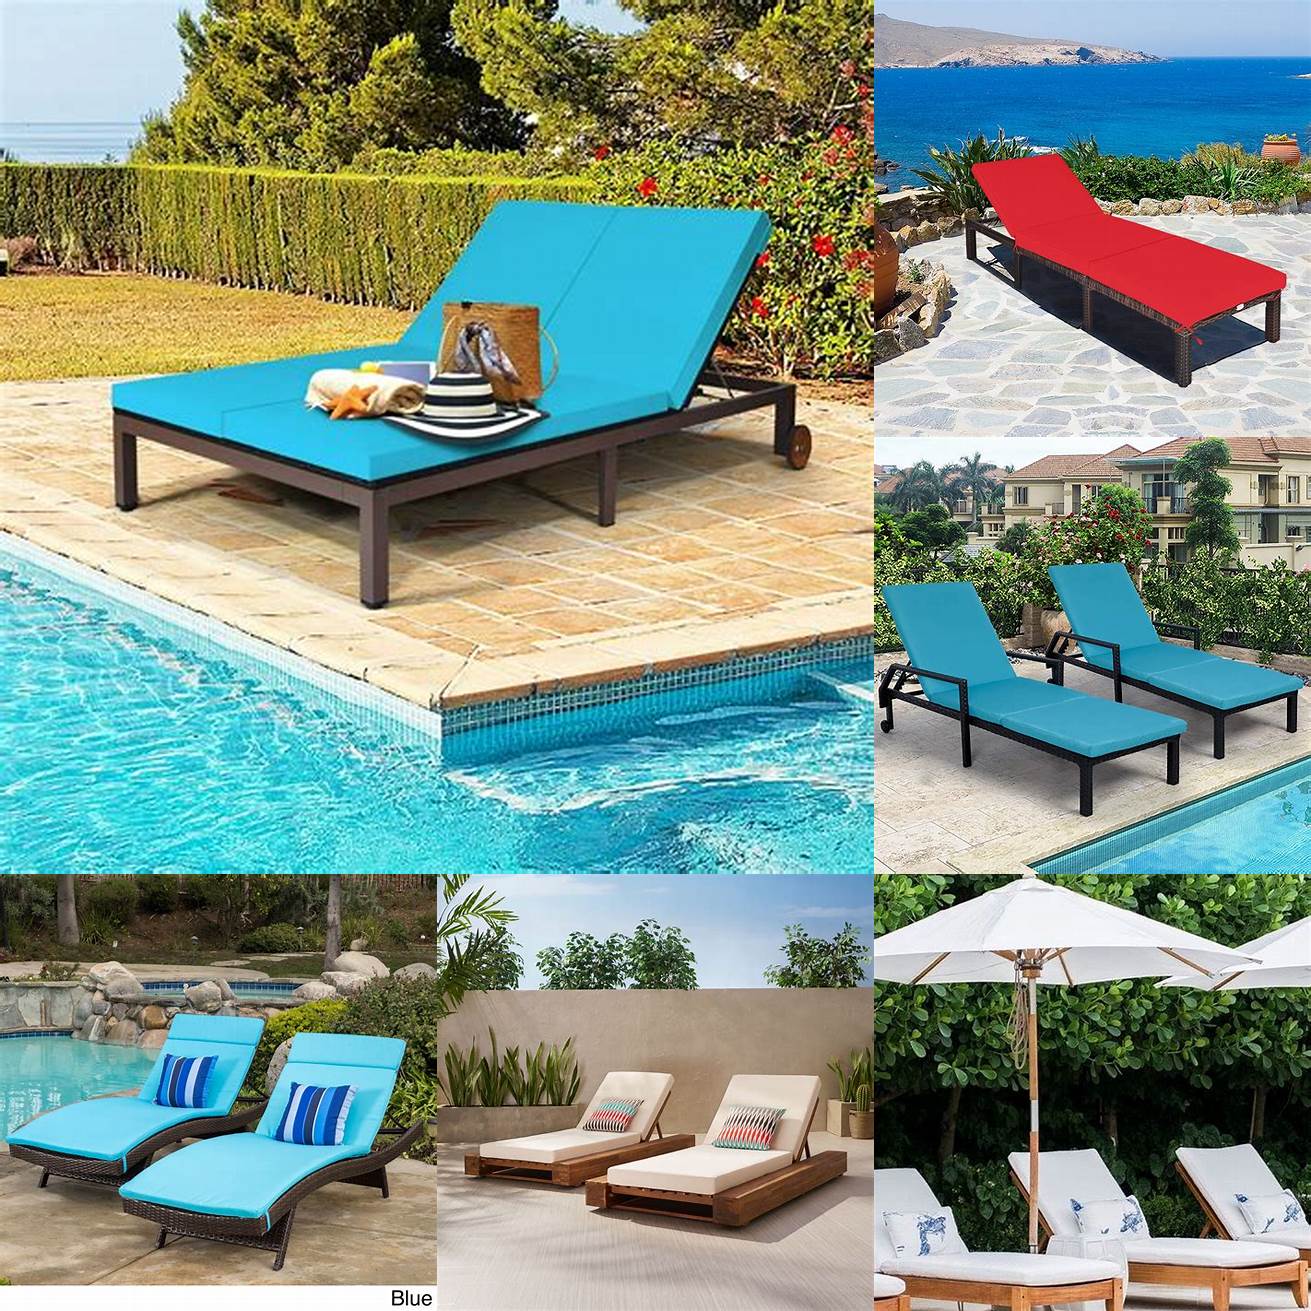 Poolside lounge chairs with colorful cushions